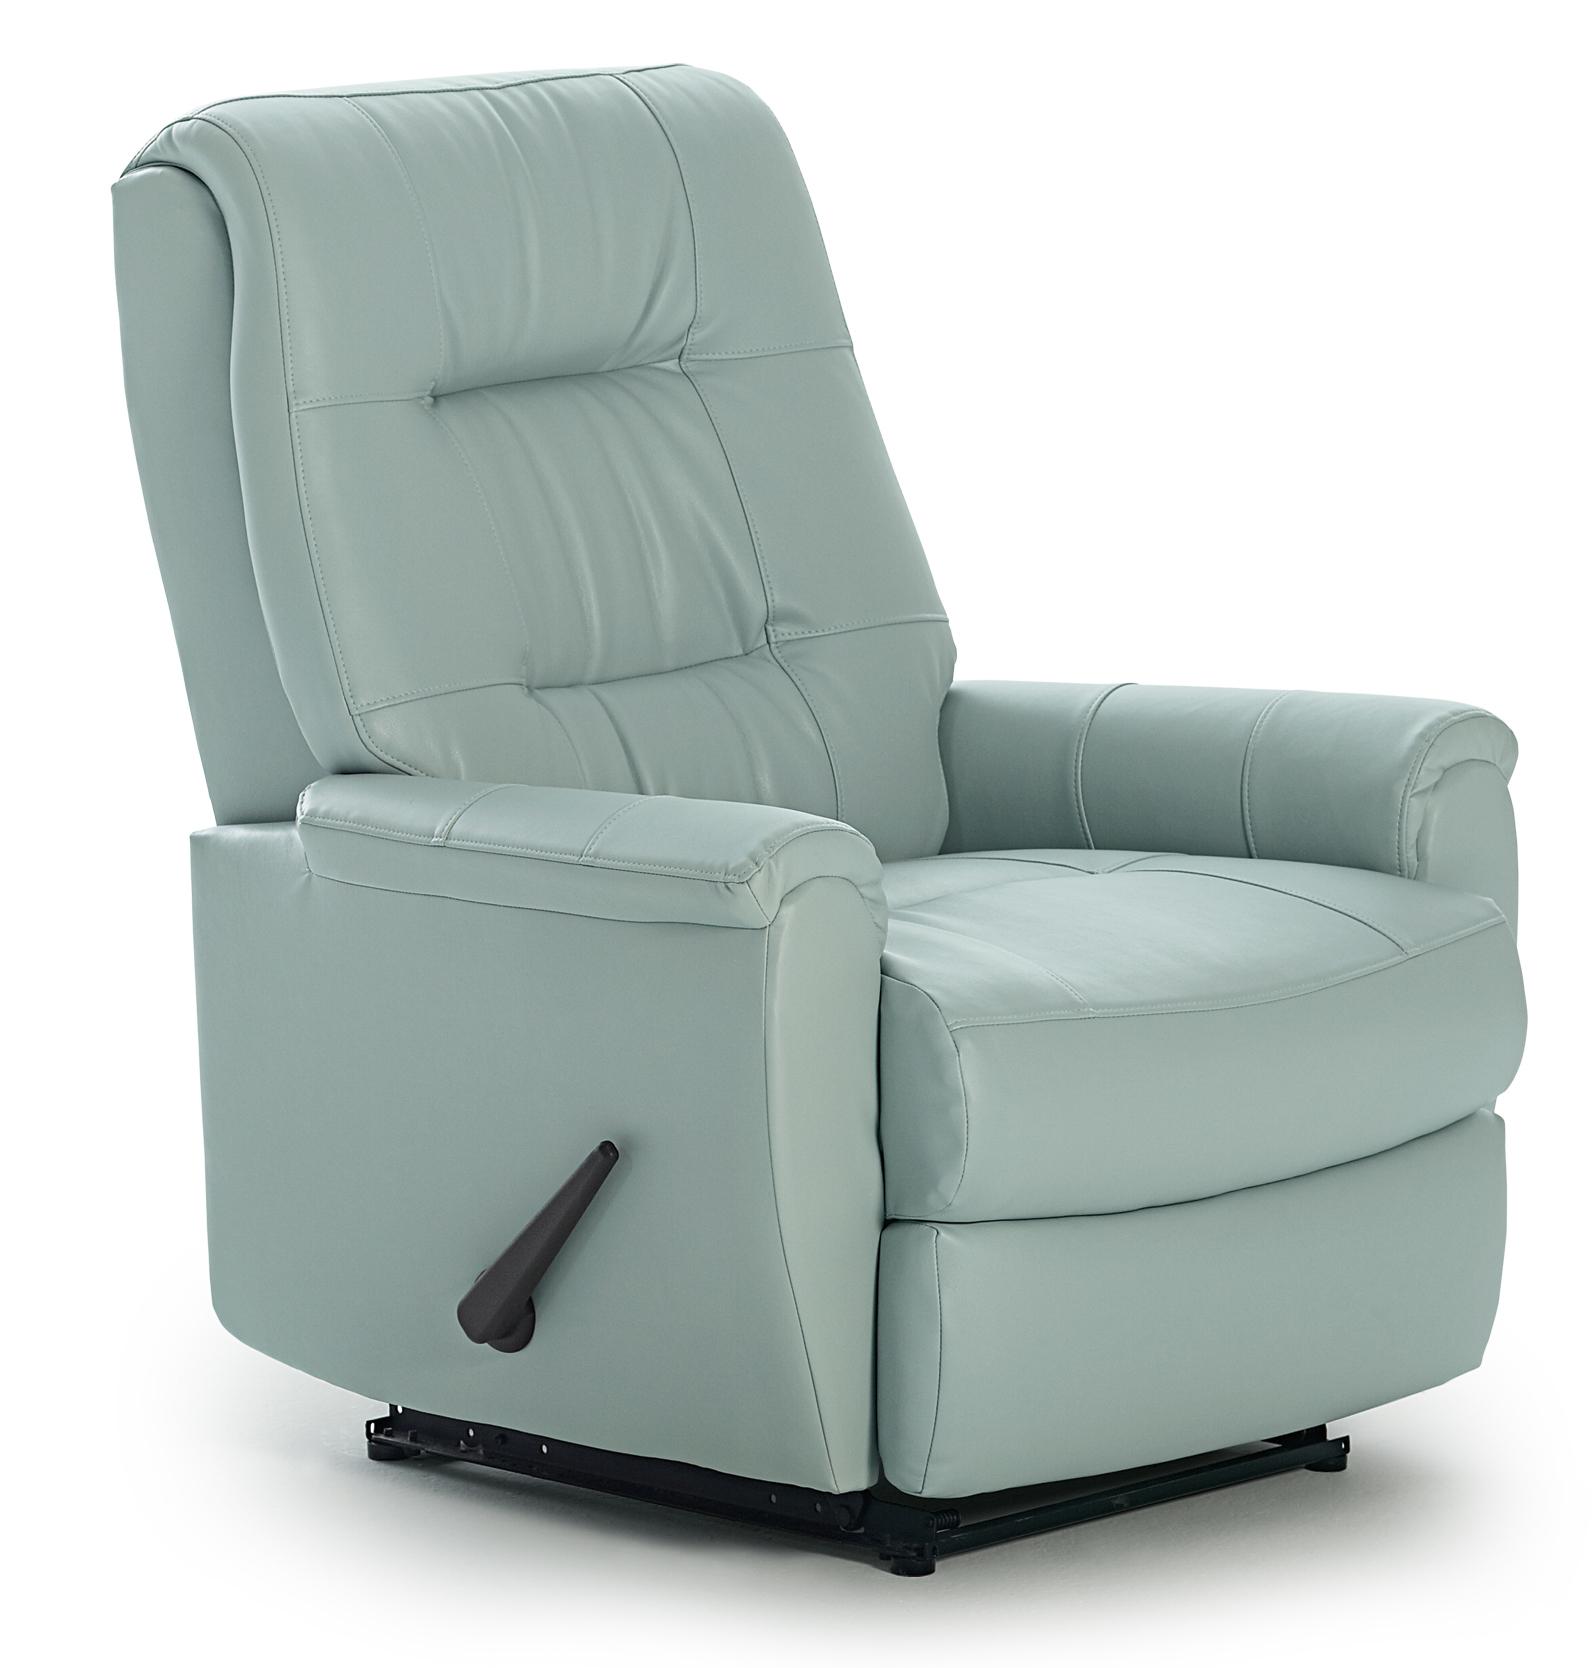 felicia swivel rocker recliner with button-tufted back BPAZQRW